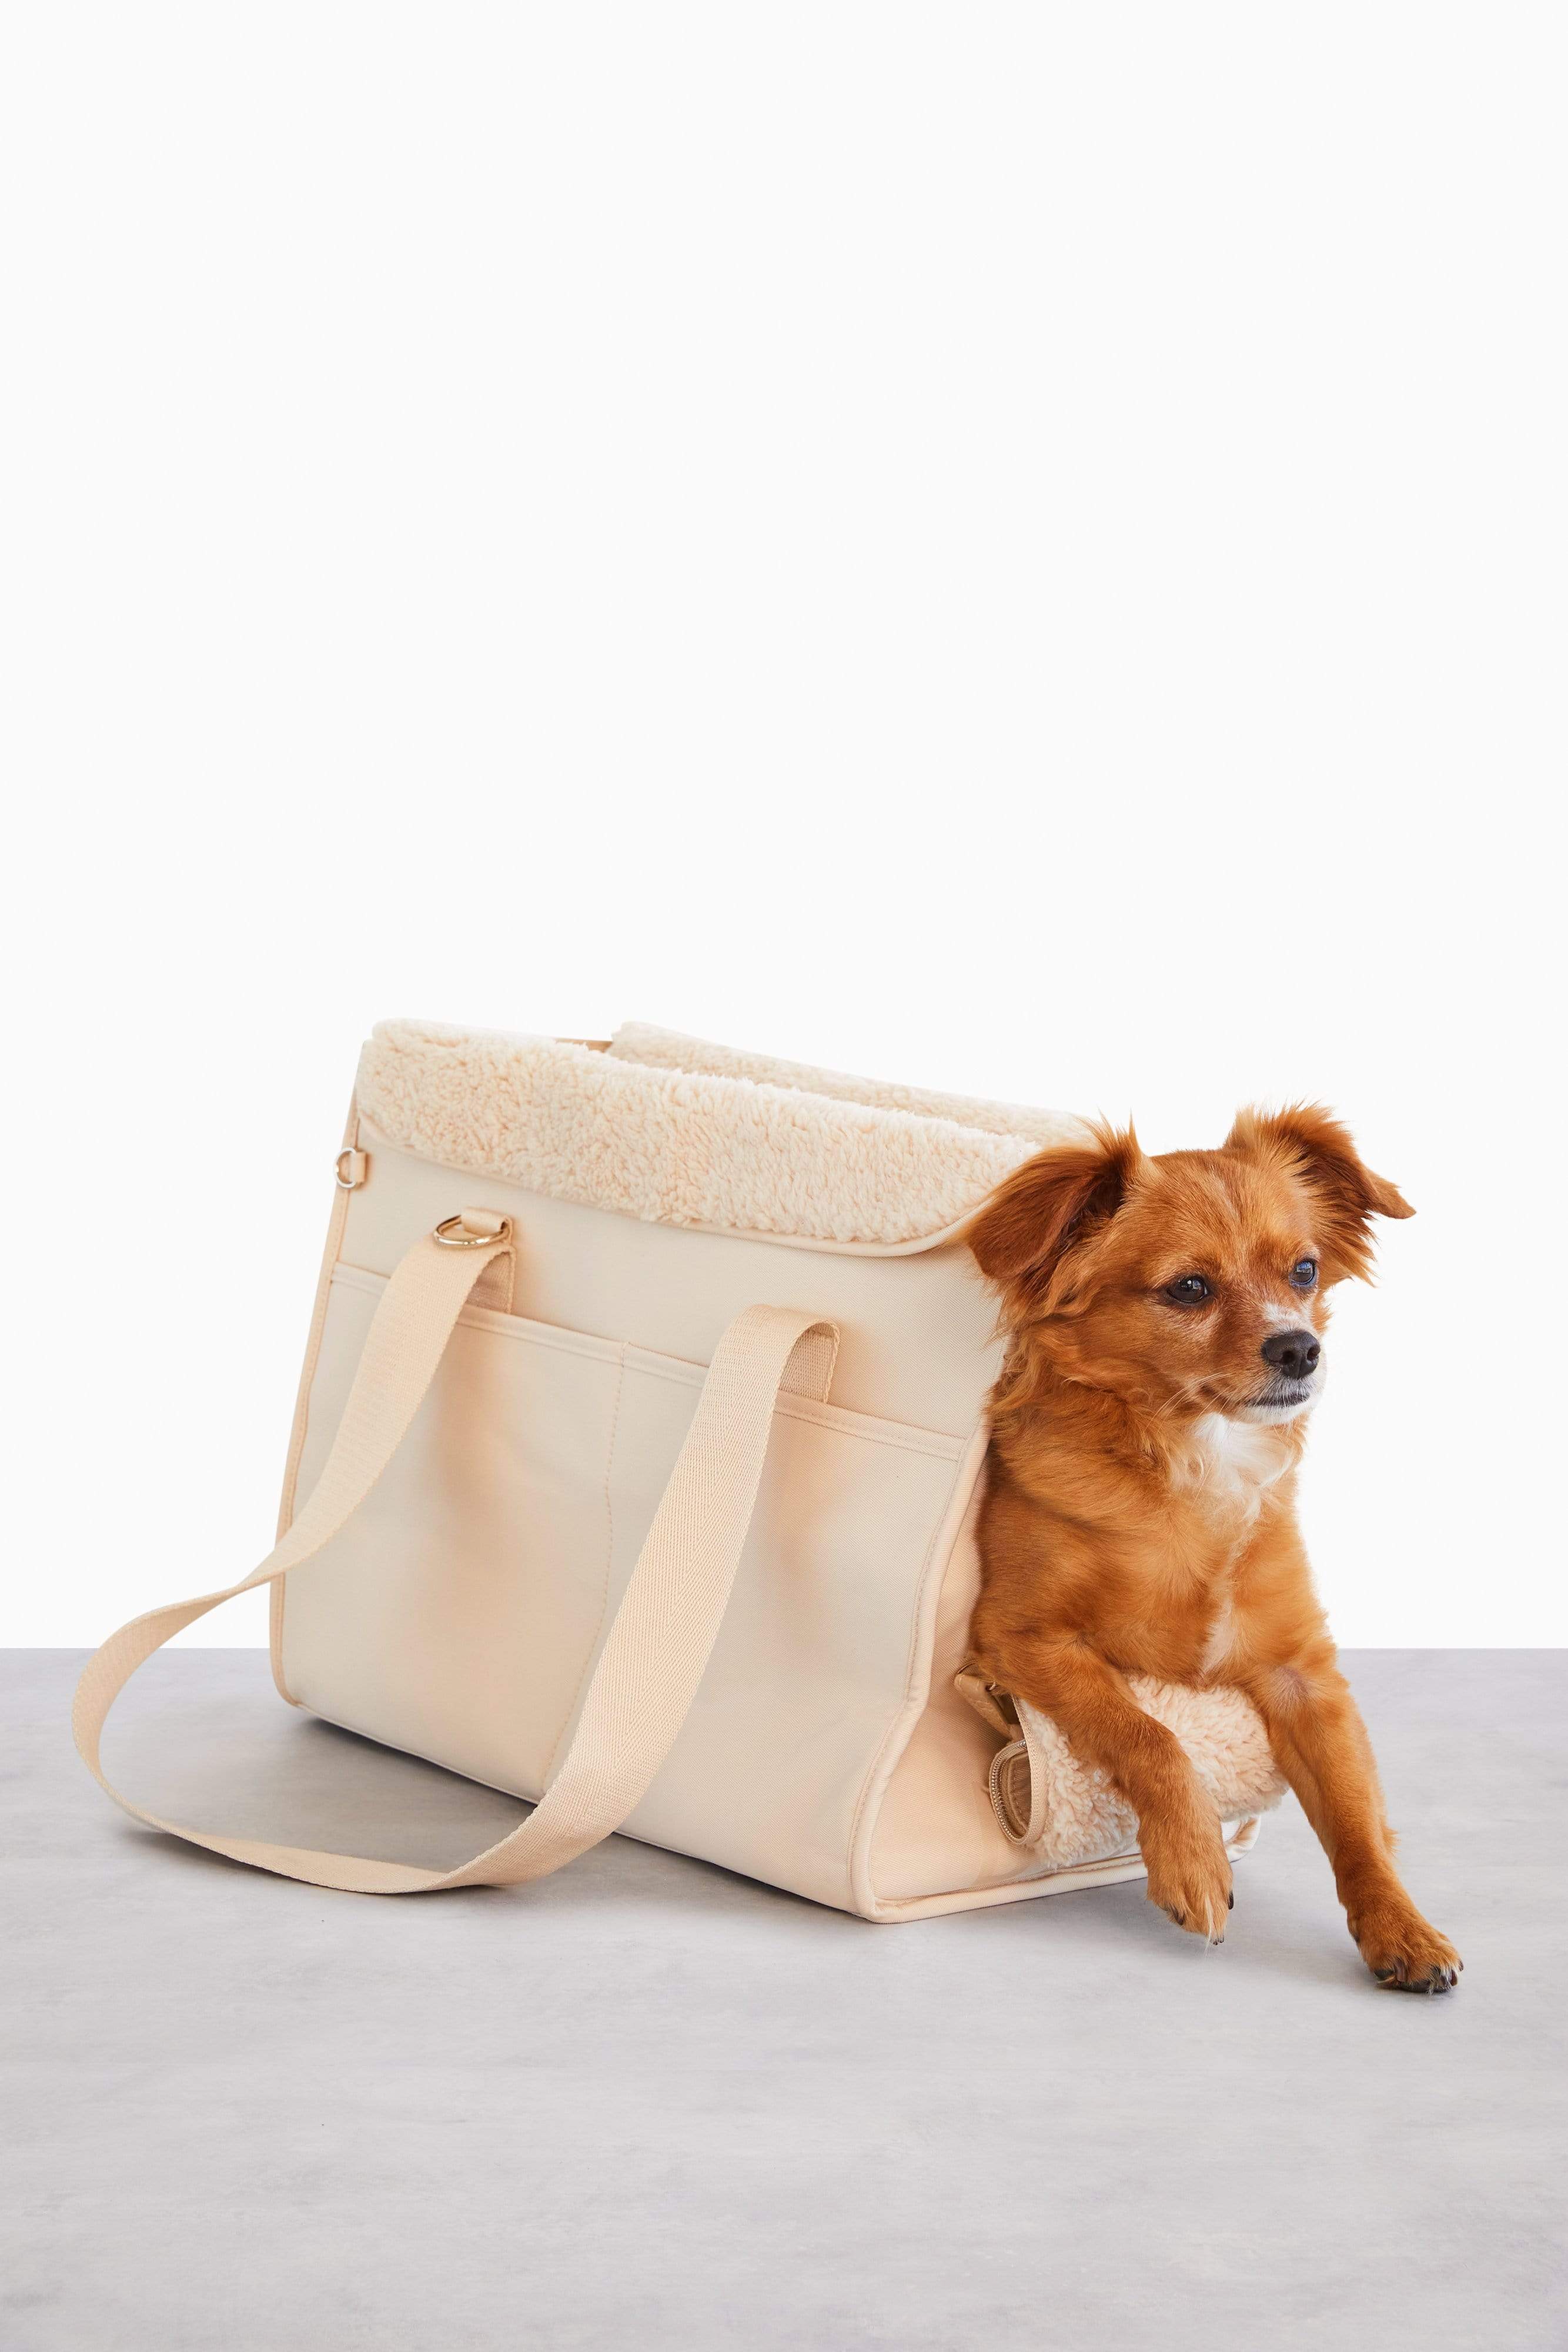 Luxury PU Leather Puppy Handbag Carrier Fashionable Puppy Handbag For  Travel, Hiking, And Shopping Brown Large Pet Valise Purse From Sibylop,  $100.78 | DHgate.Com